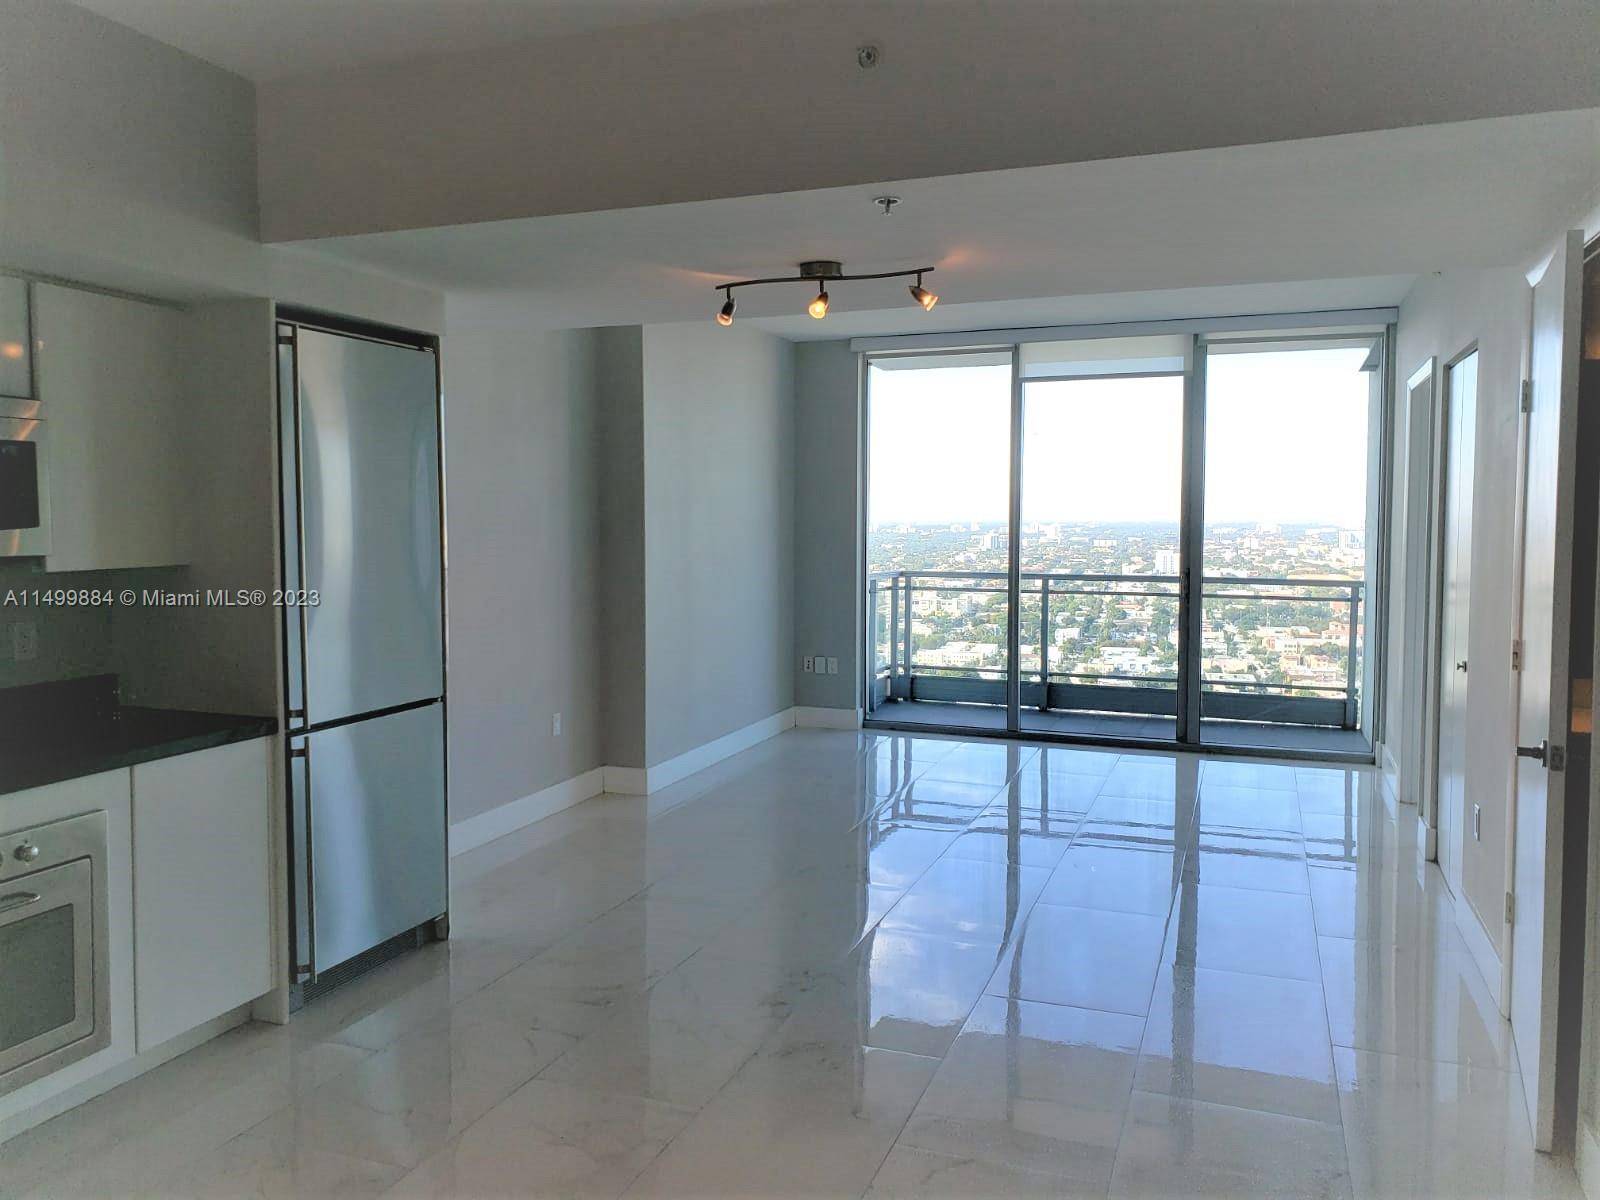 Very Nice Apartment Located at Mint Condominium Building in Brickell River Front Area, Walking Distance to Mary Brickell Village and Brickell Citi Centre.